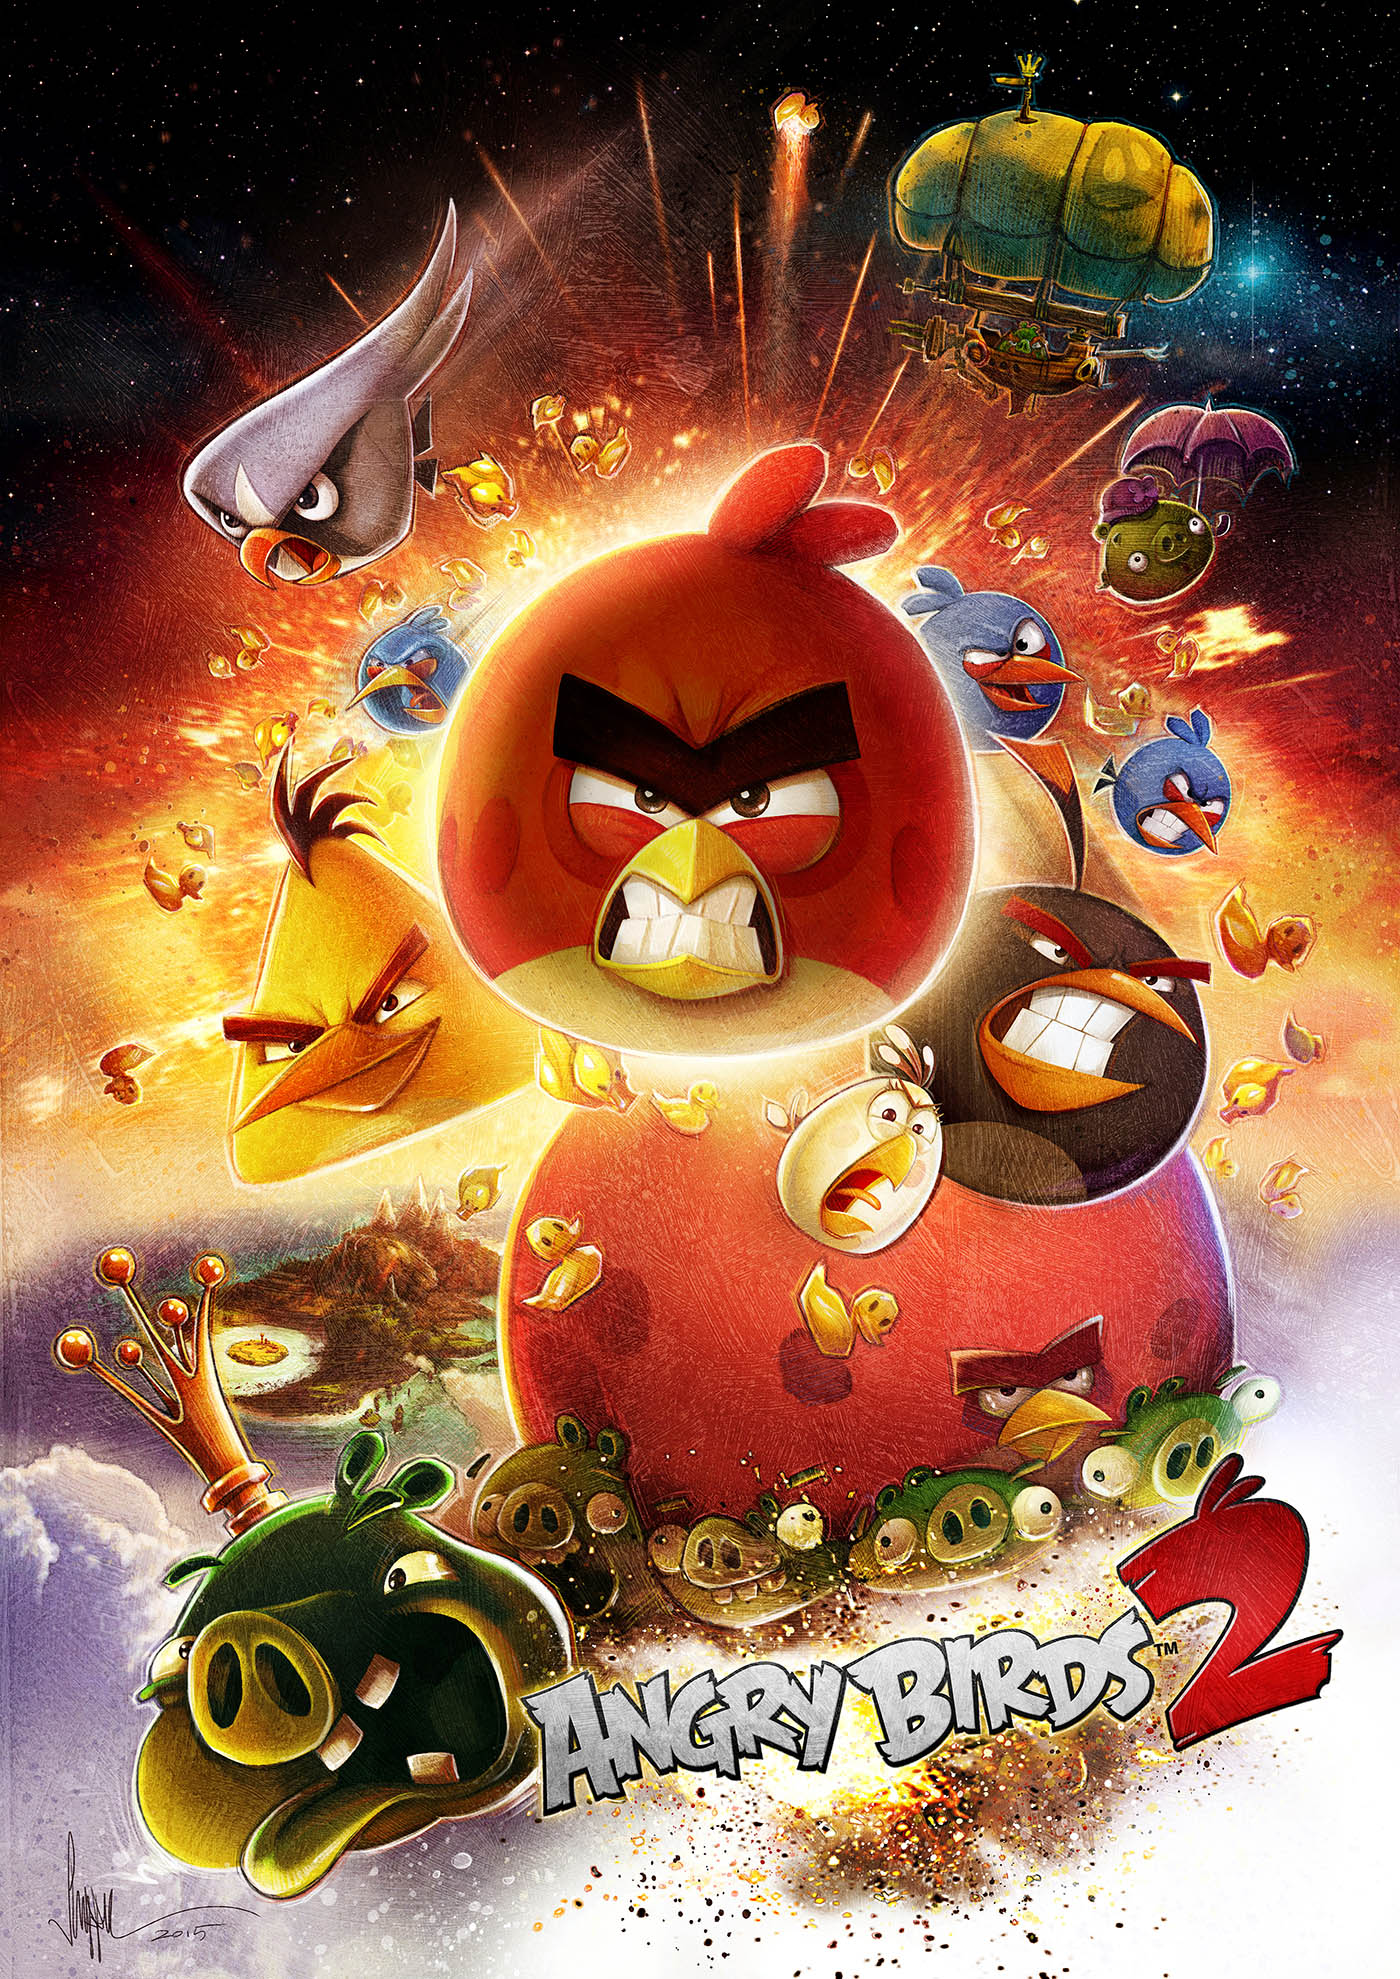 Jetpack Joyride: Strap on a bullet-powered jetpack and dodge lasers, zappers, and missiles in this action-packed adventure.
Angry Birds Rio: Join the Angry Birds as they rescue their bird friends in Rio de Janeiro in this entertaining spin-off.